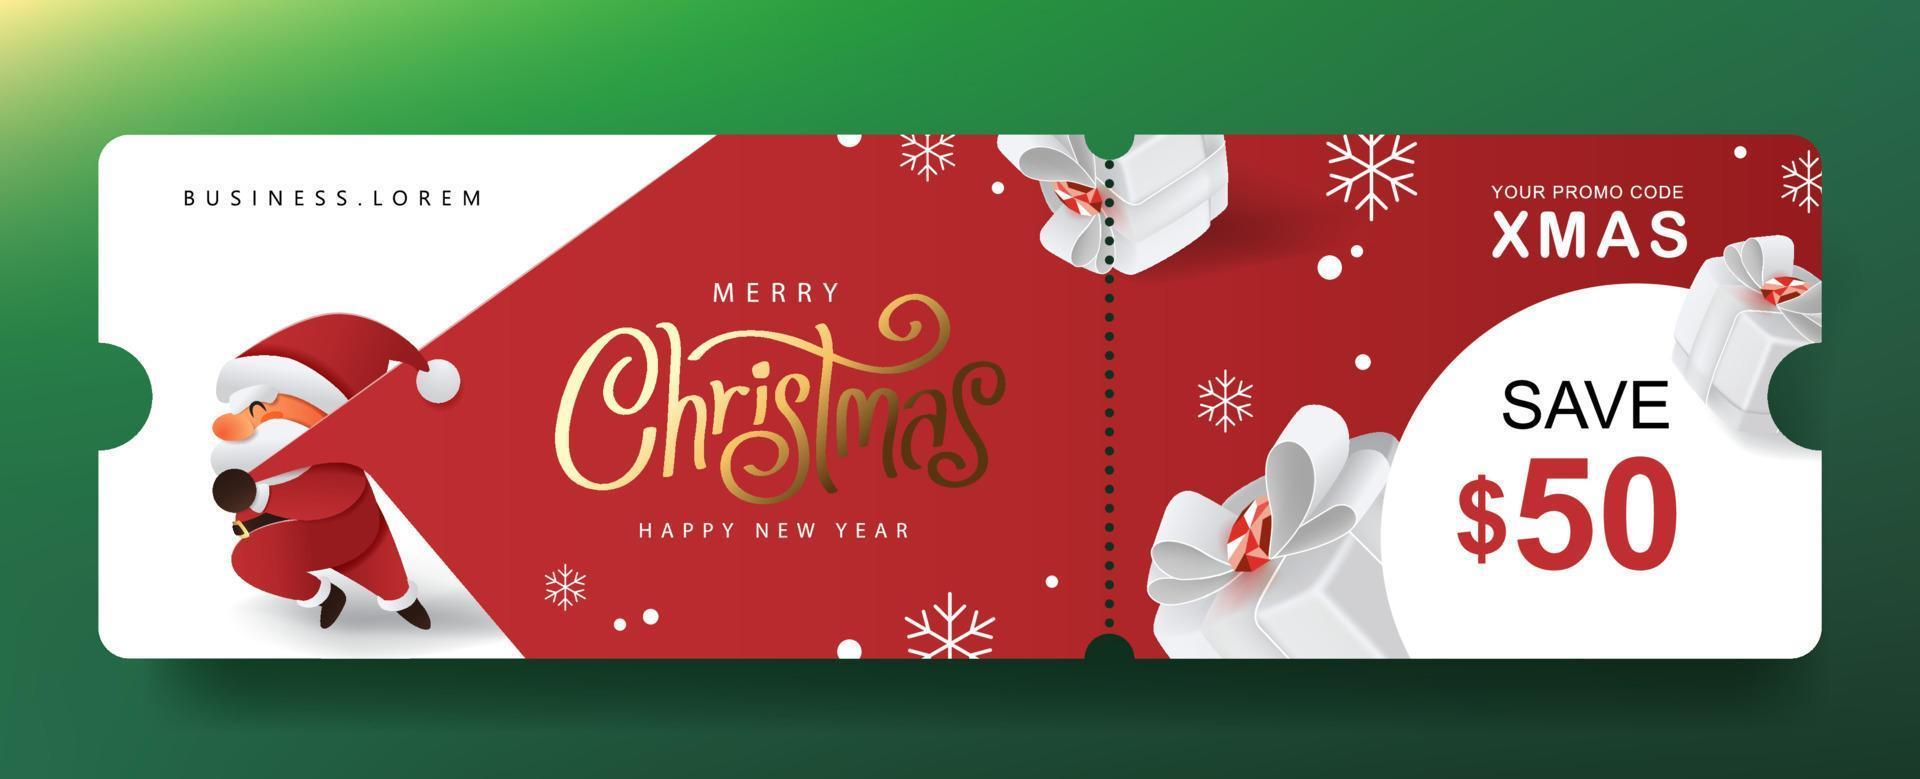 Merry Christmas Gift promotion Coupon banner with cute Santa Claus and festive decoration vector